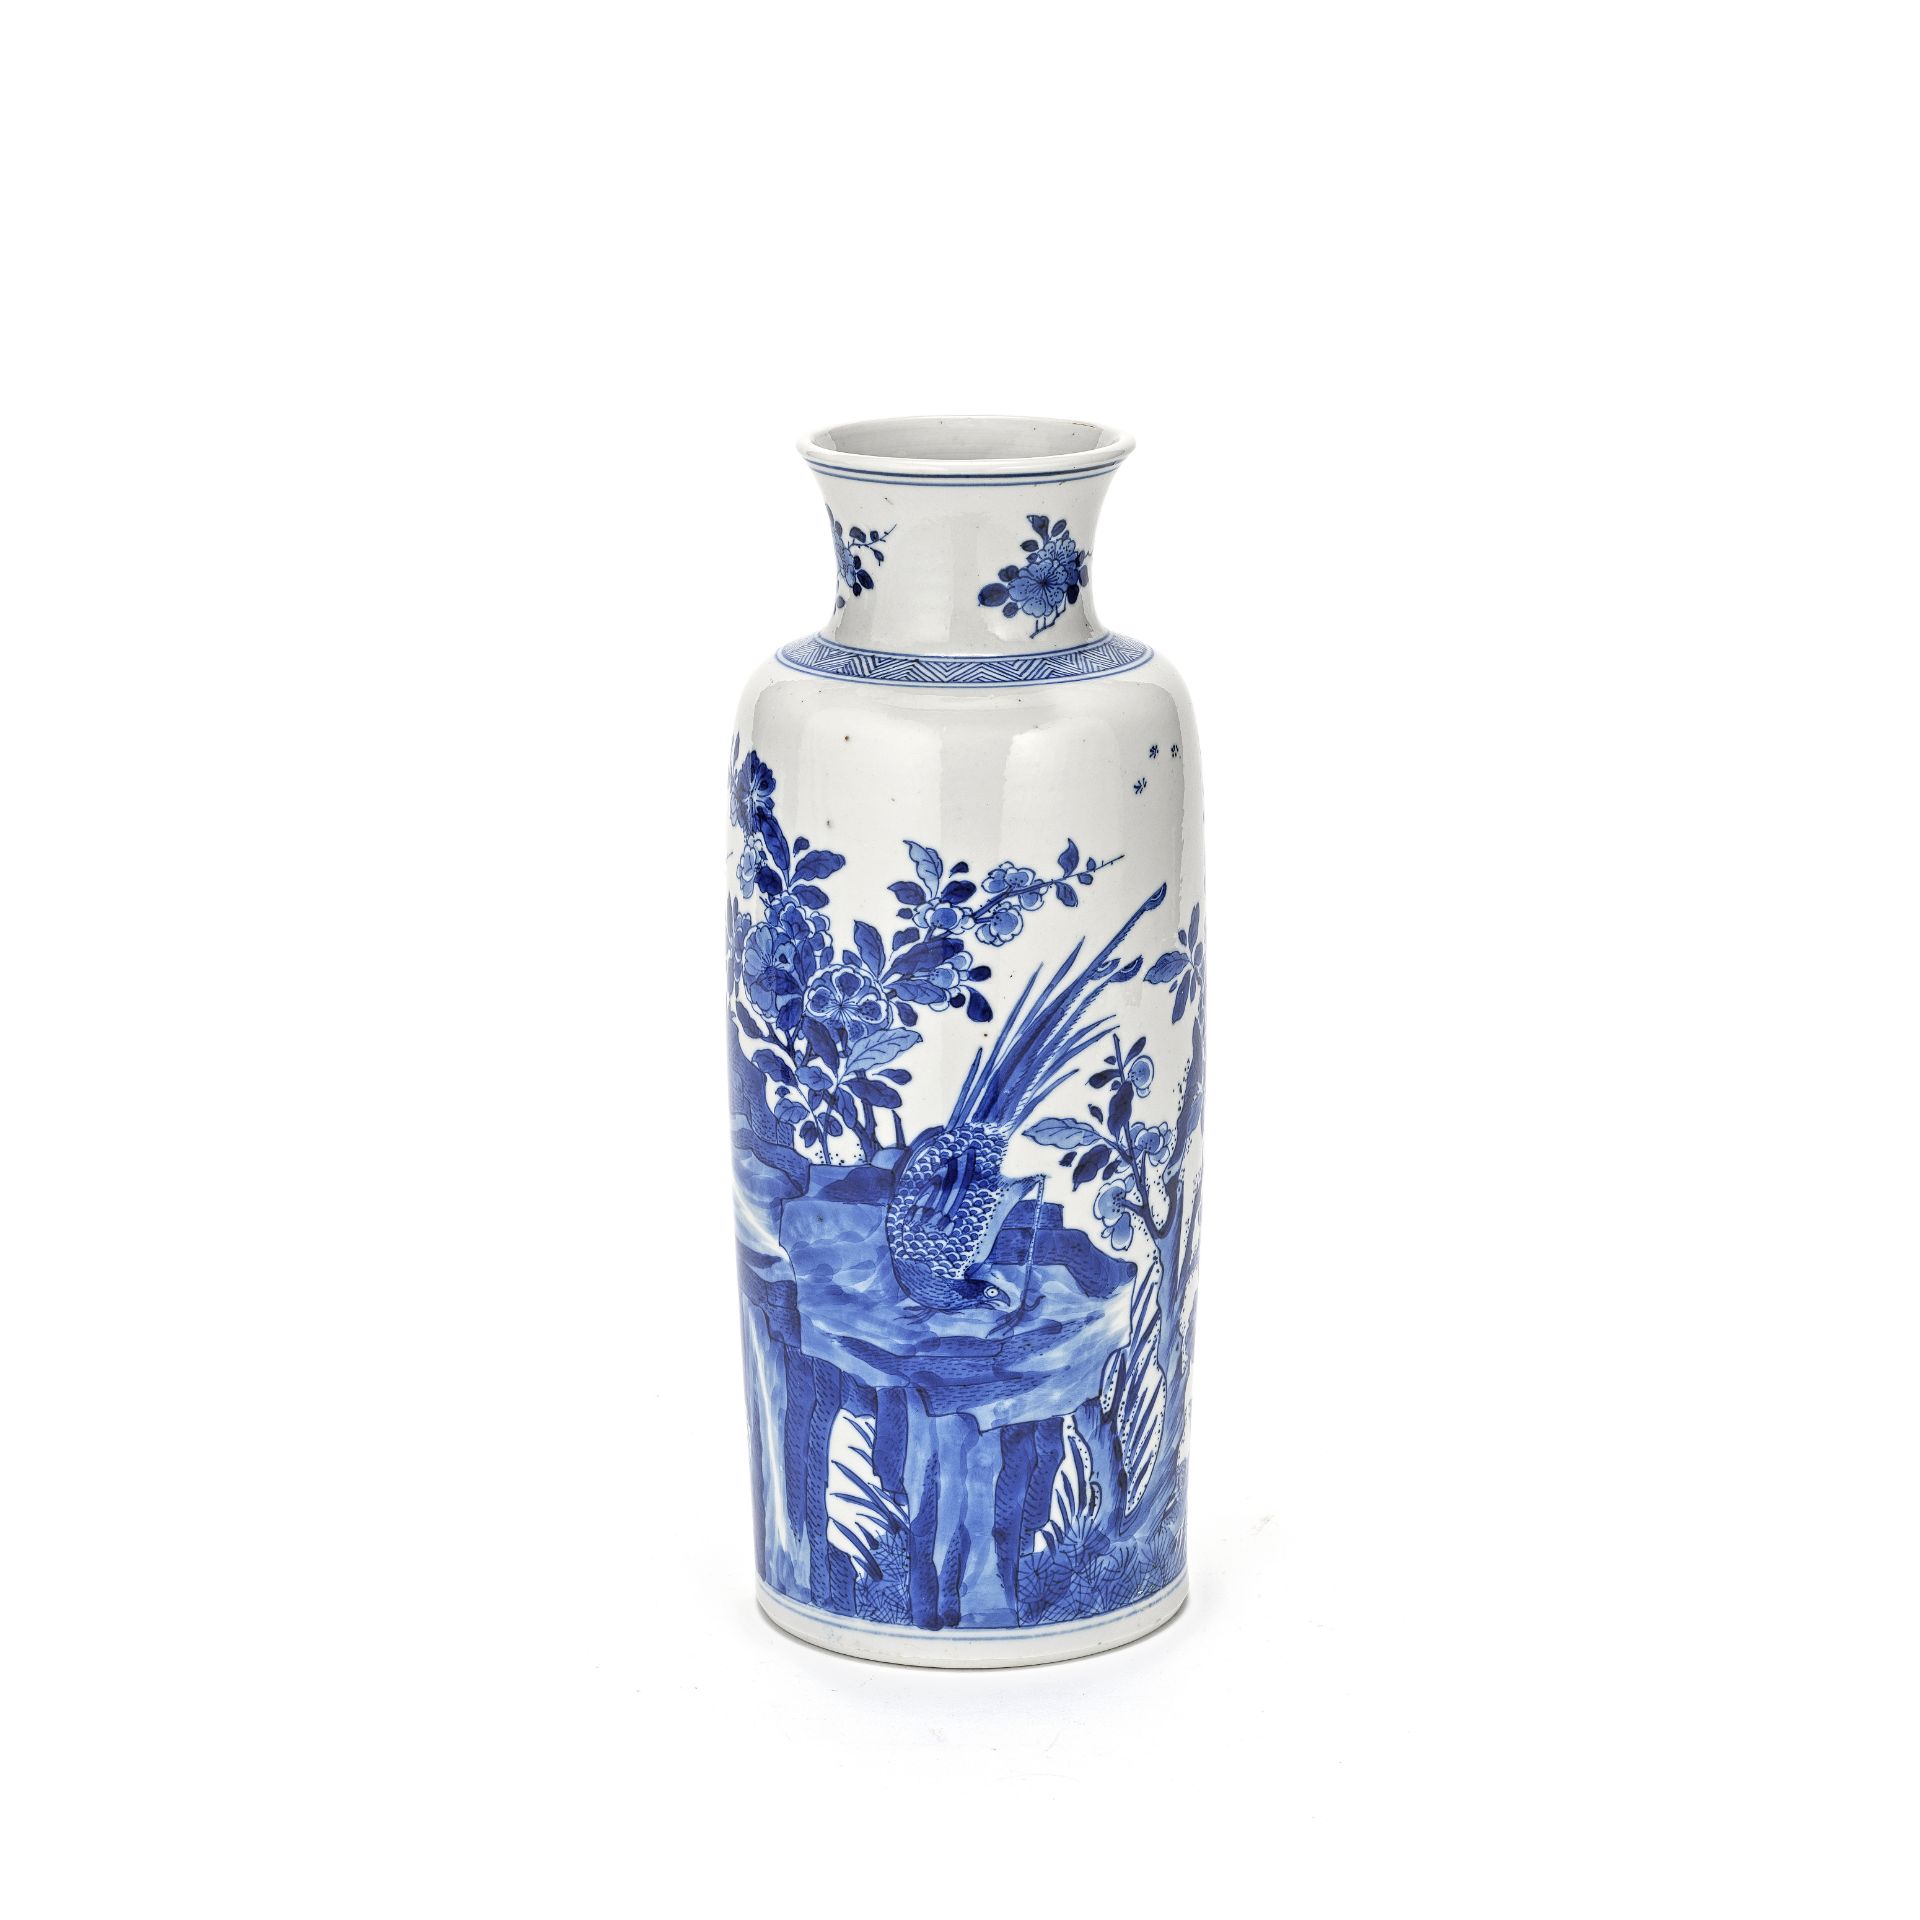 A BLUE AND WHITE ROULEAU VASE Kangxi